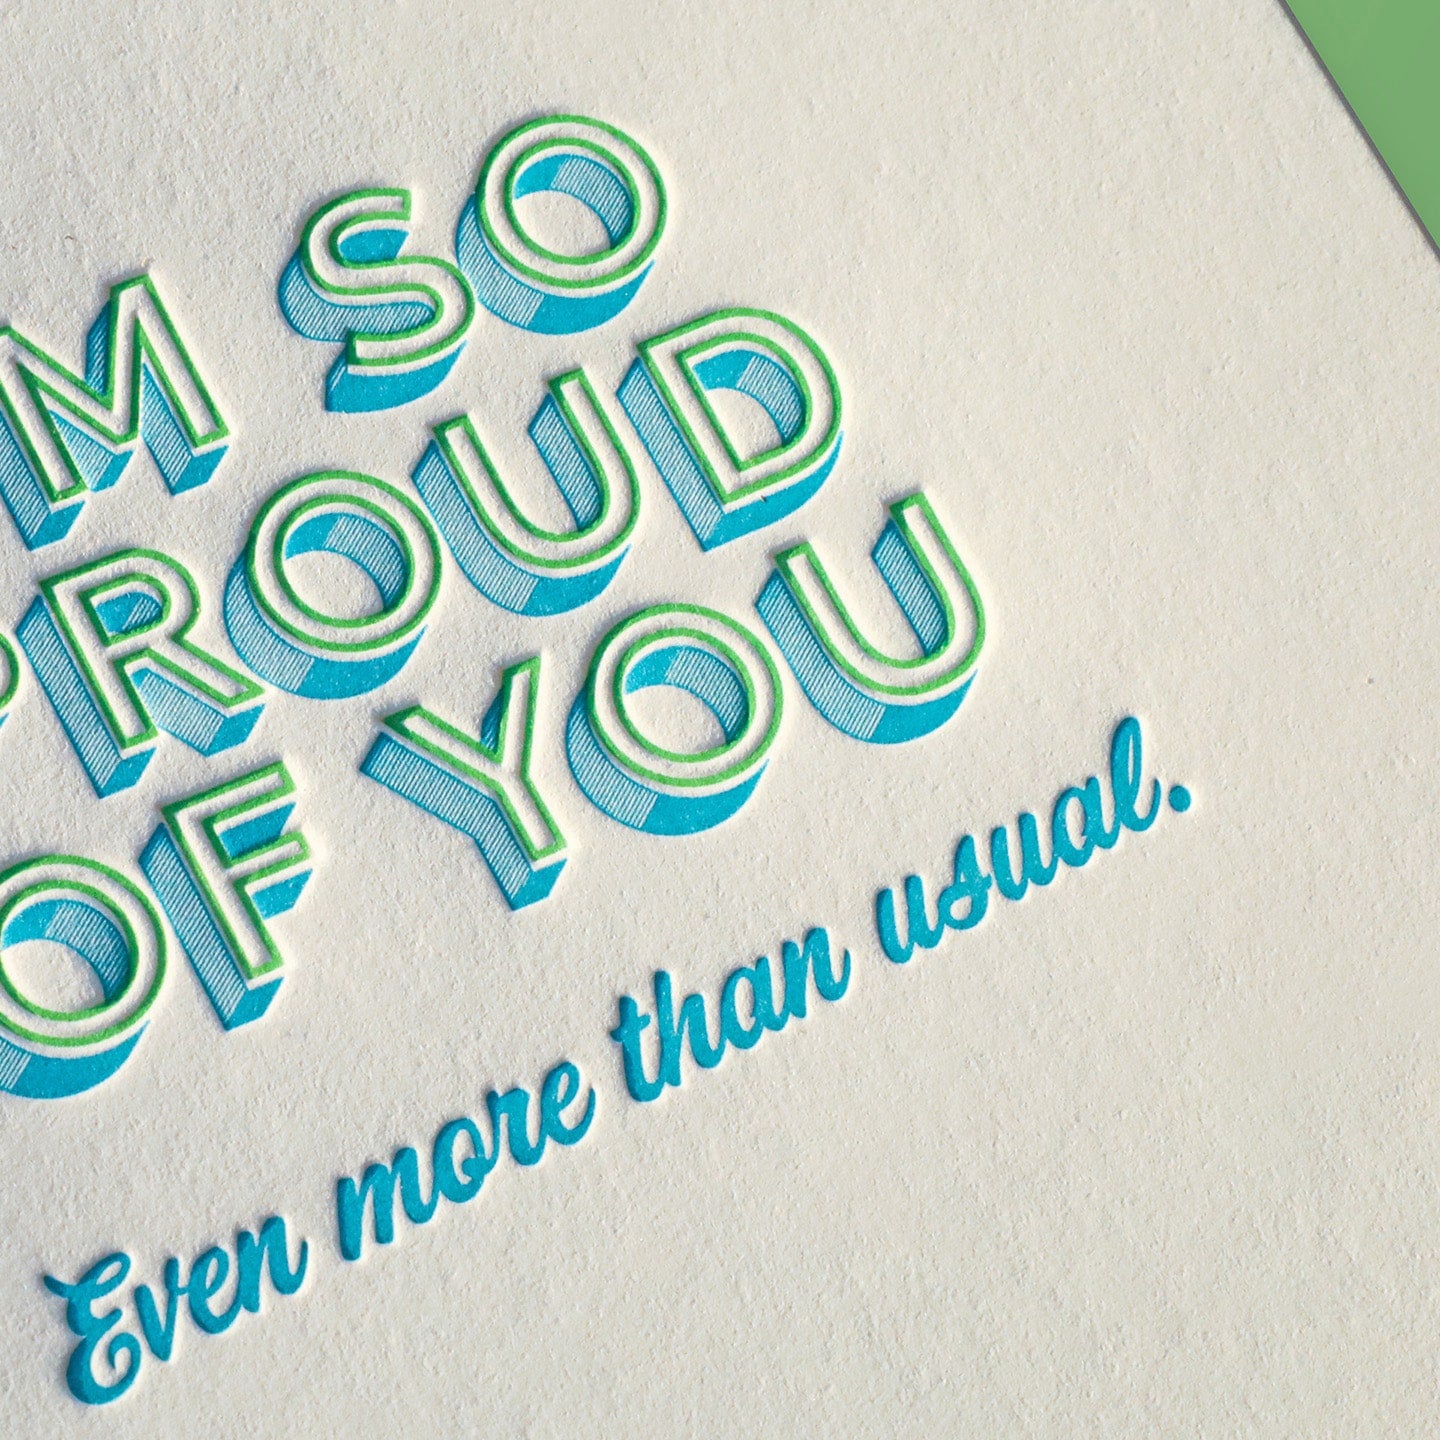 New Listing Beyond Proud of You Encouraging Greeting Card